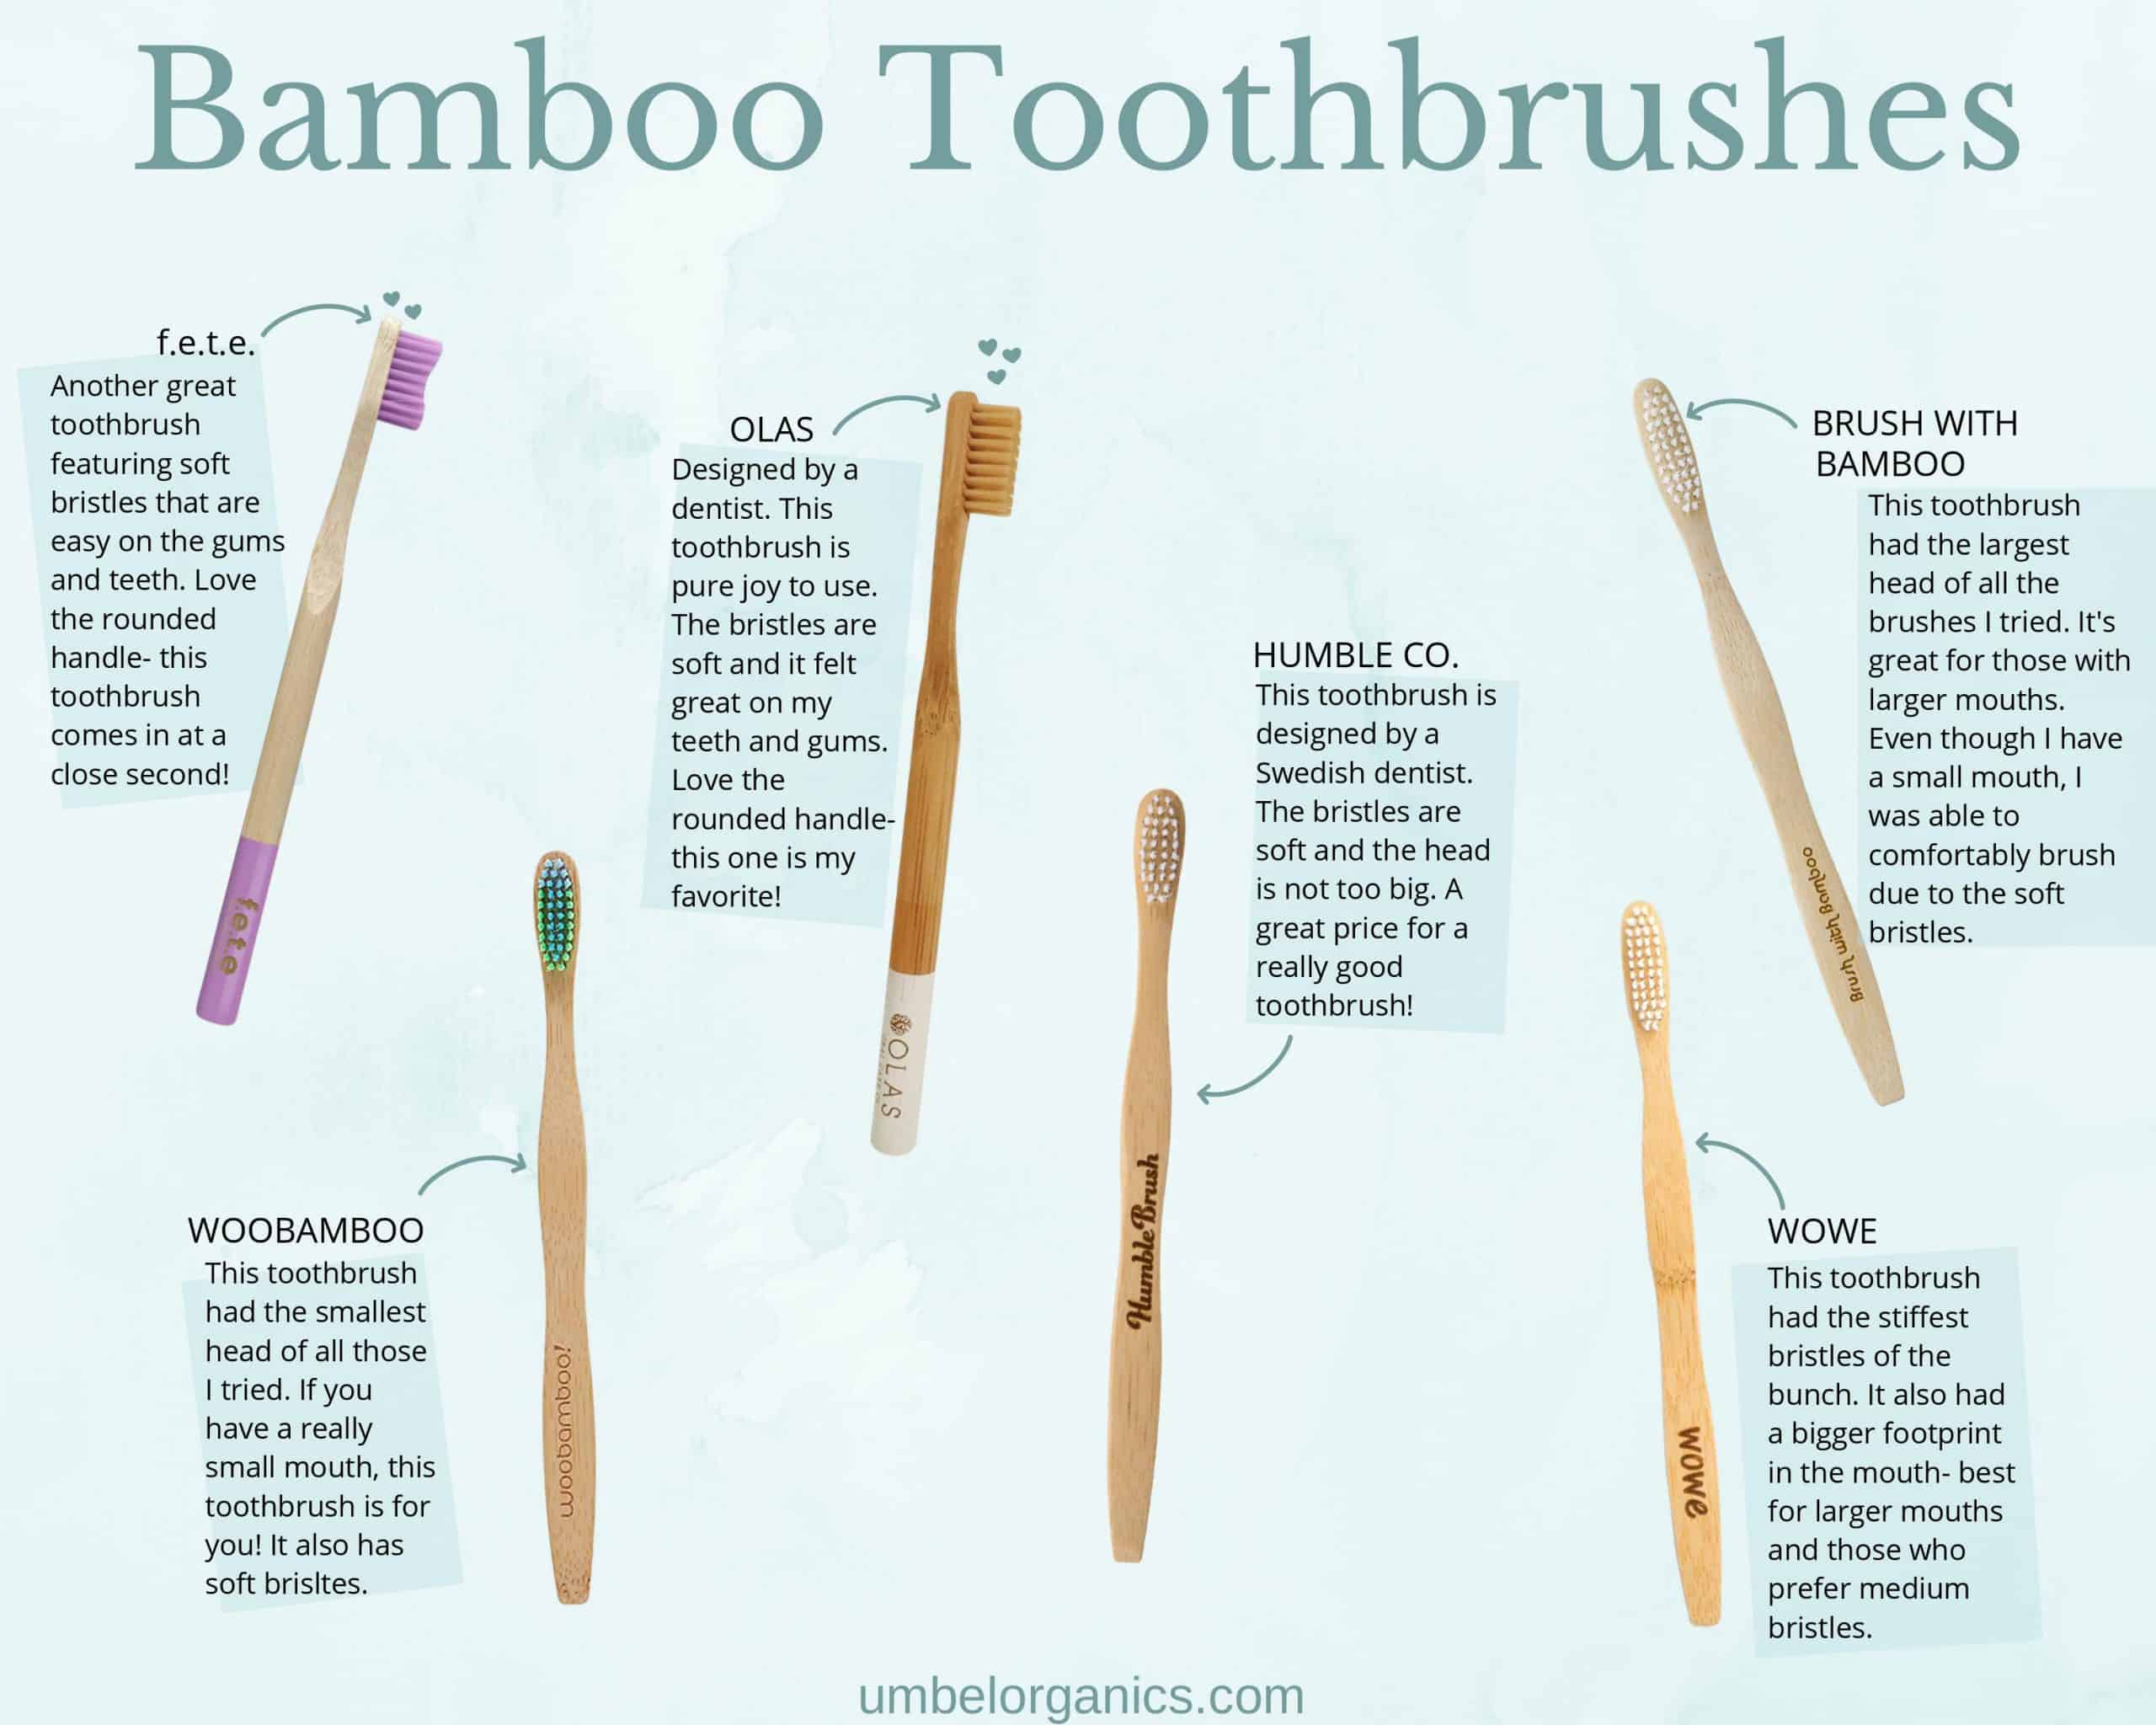 6 Brands of Bamboo Toothbrushes Reviewed